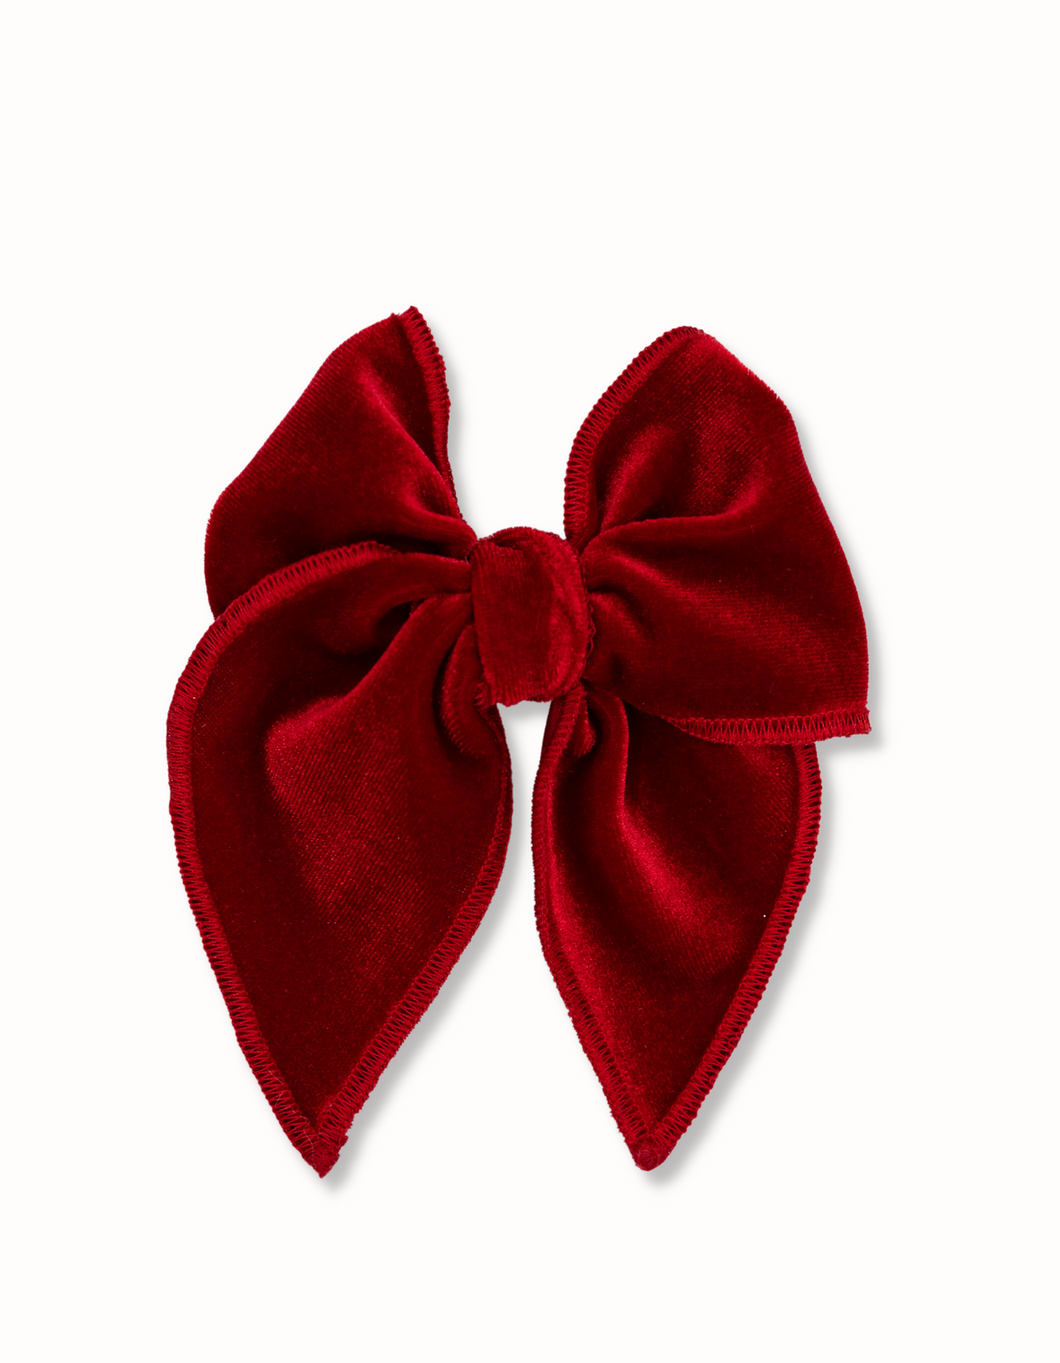 Livy Lou Collection, Ruby Fable Bow, Holiday Collection